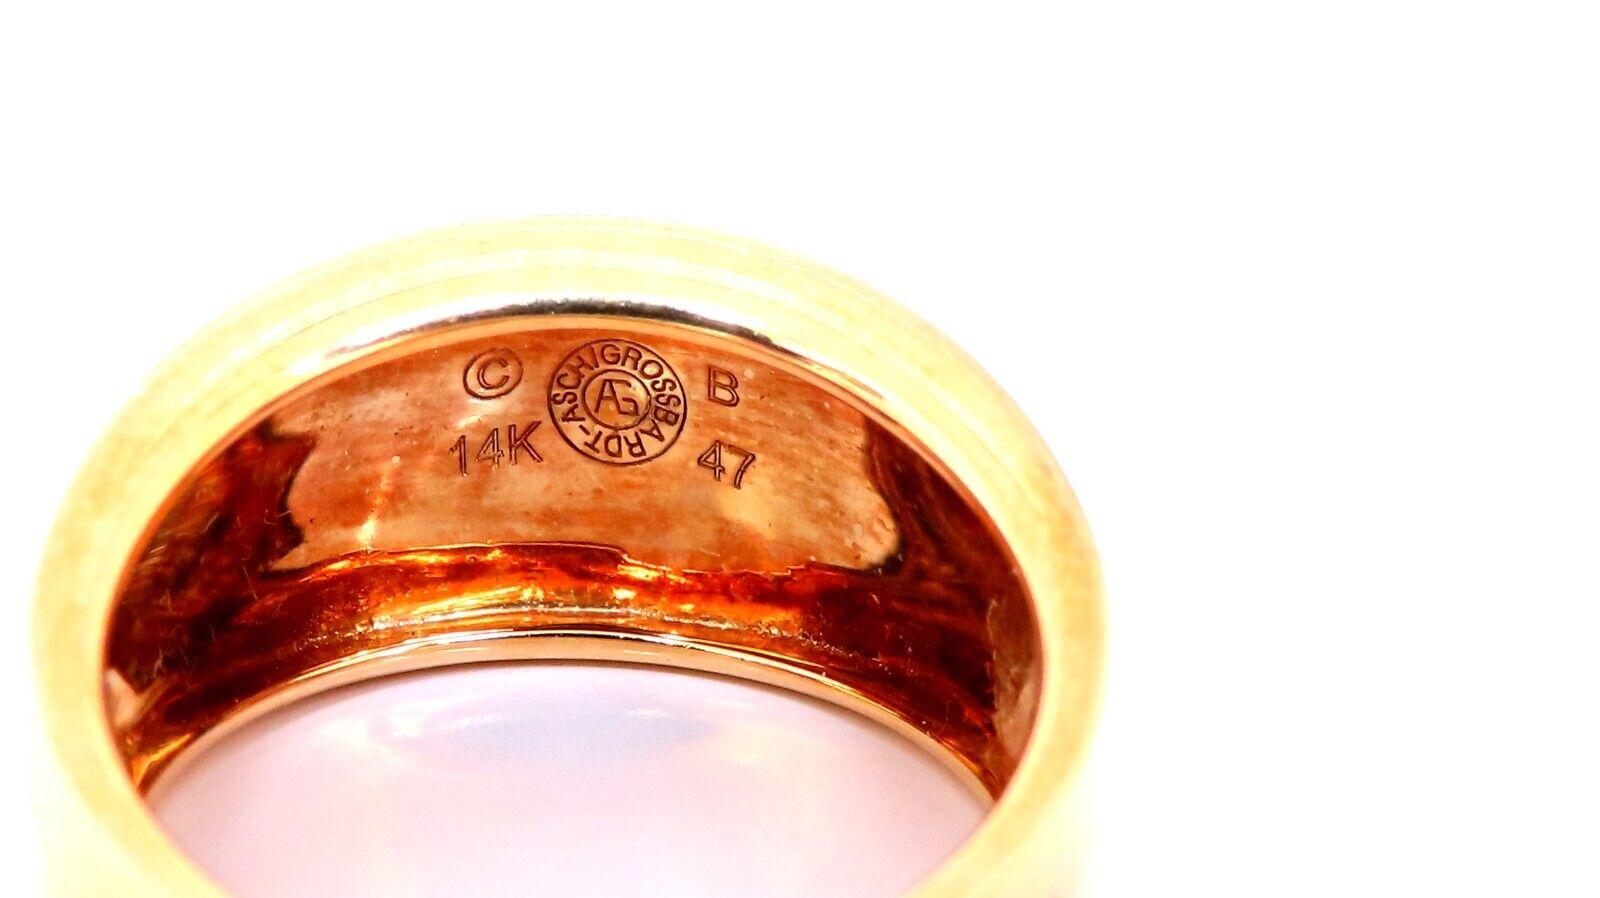 Authentic Asch Grossbardt

CArved Moonstone Twin band.

threads of greens, orange and some yellows.

14kt. yellow gold

6.7 grams.

Ring measures: 10mm wide

Depth: 4mm

current ring size: 6.5